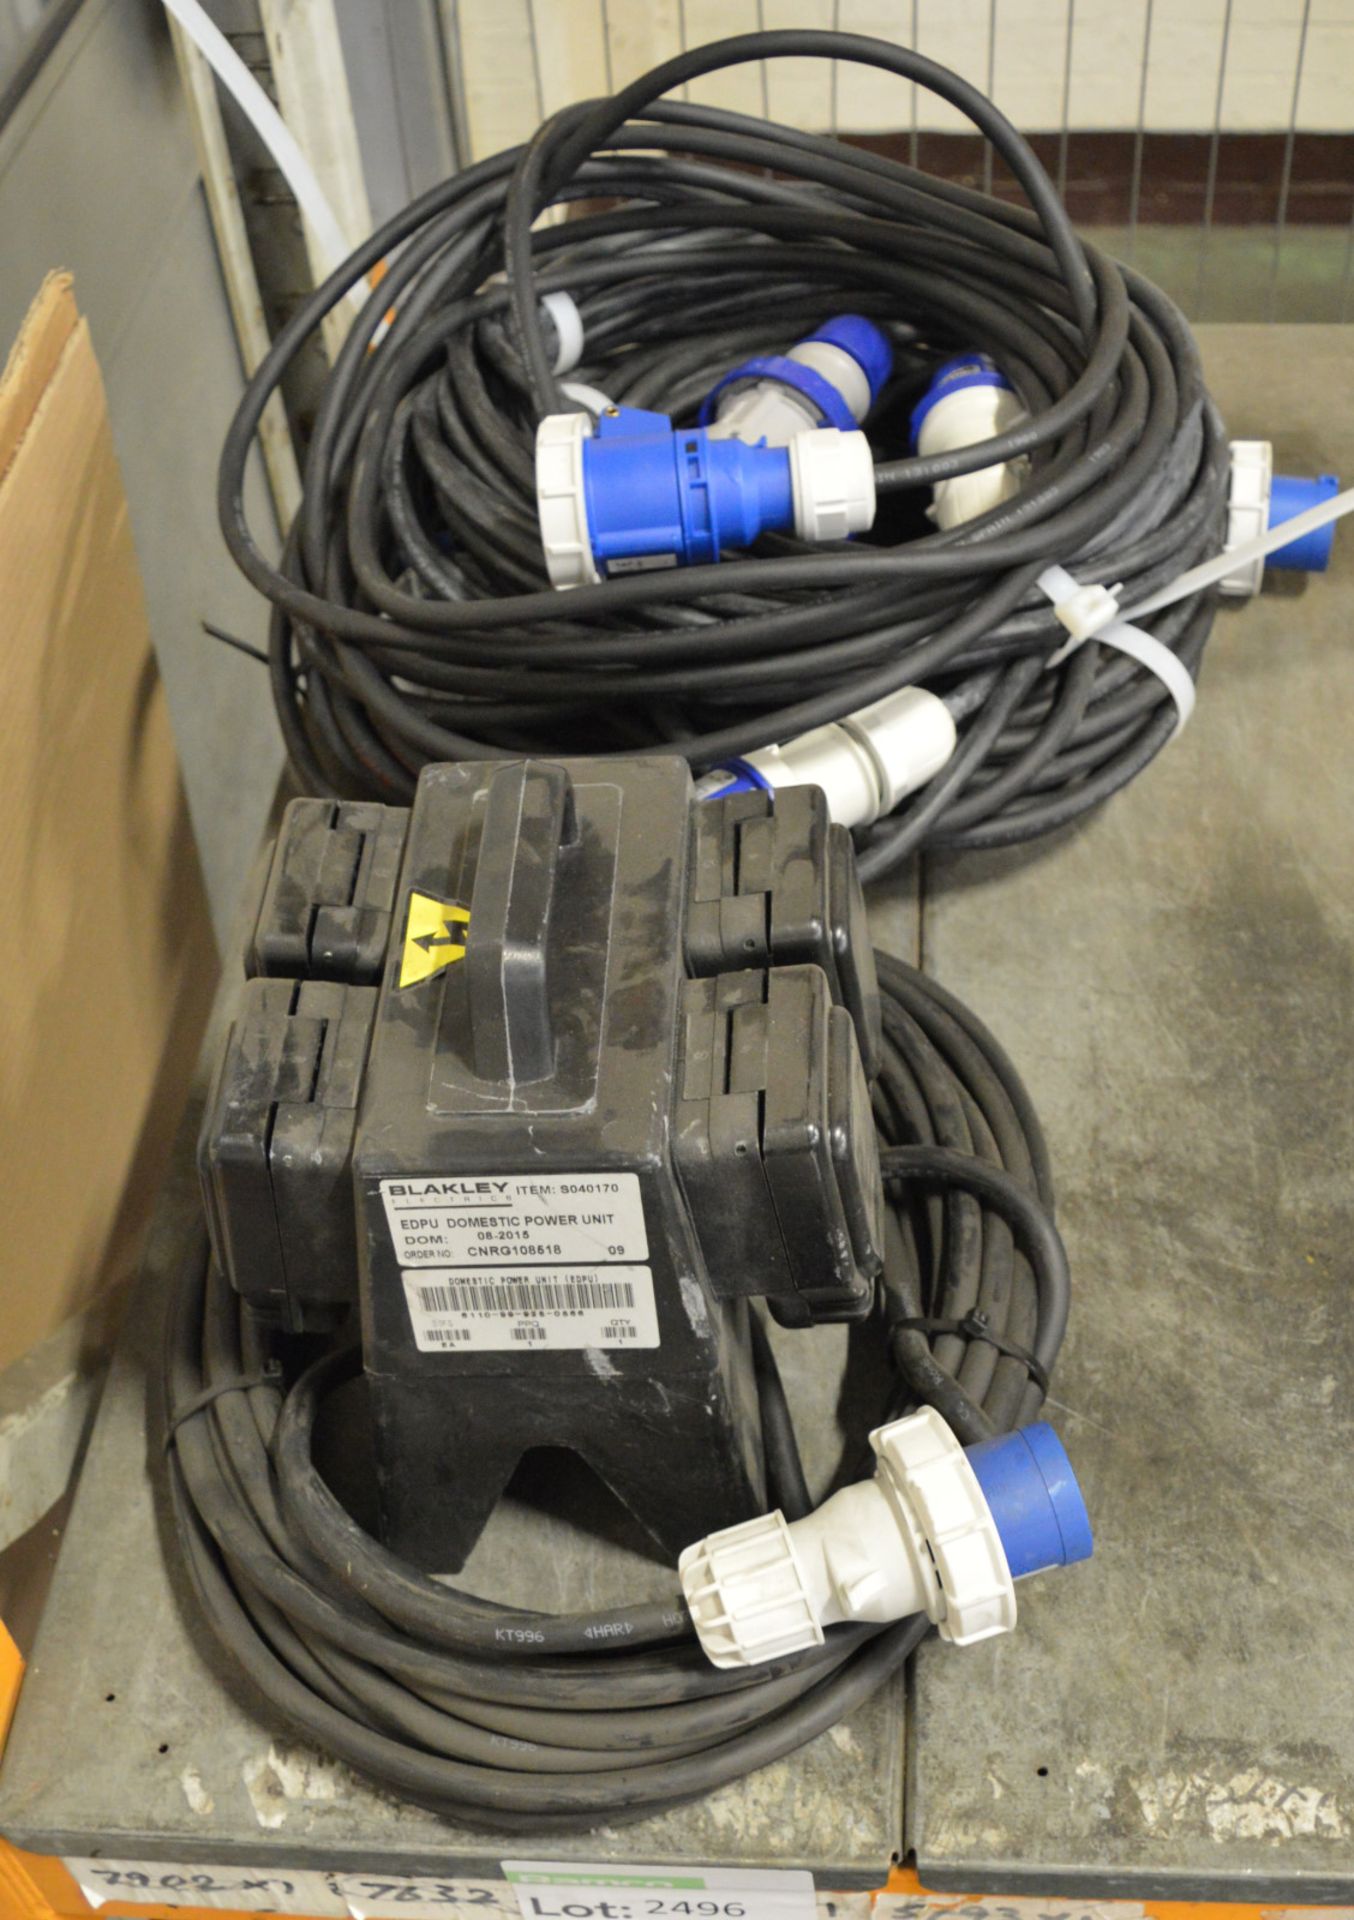 1x Blakley Domestic Power Unit with 16A Cable. 3x 16A Extension Leads, 1x 16 Cable.